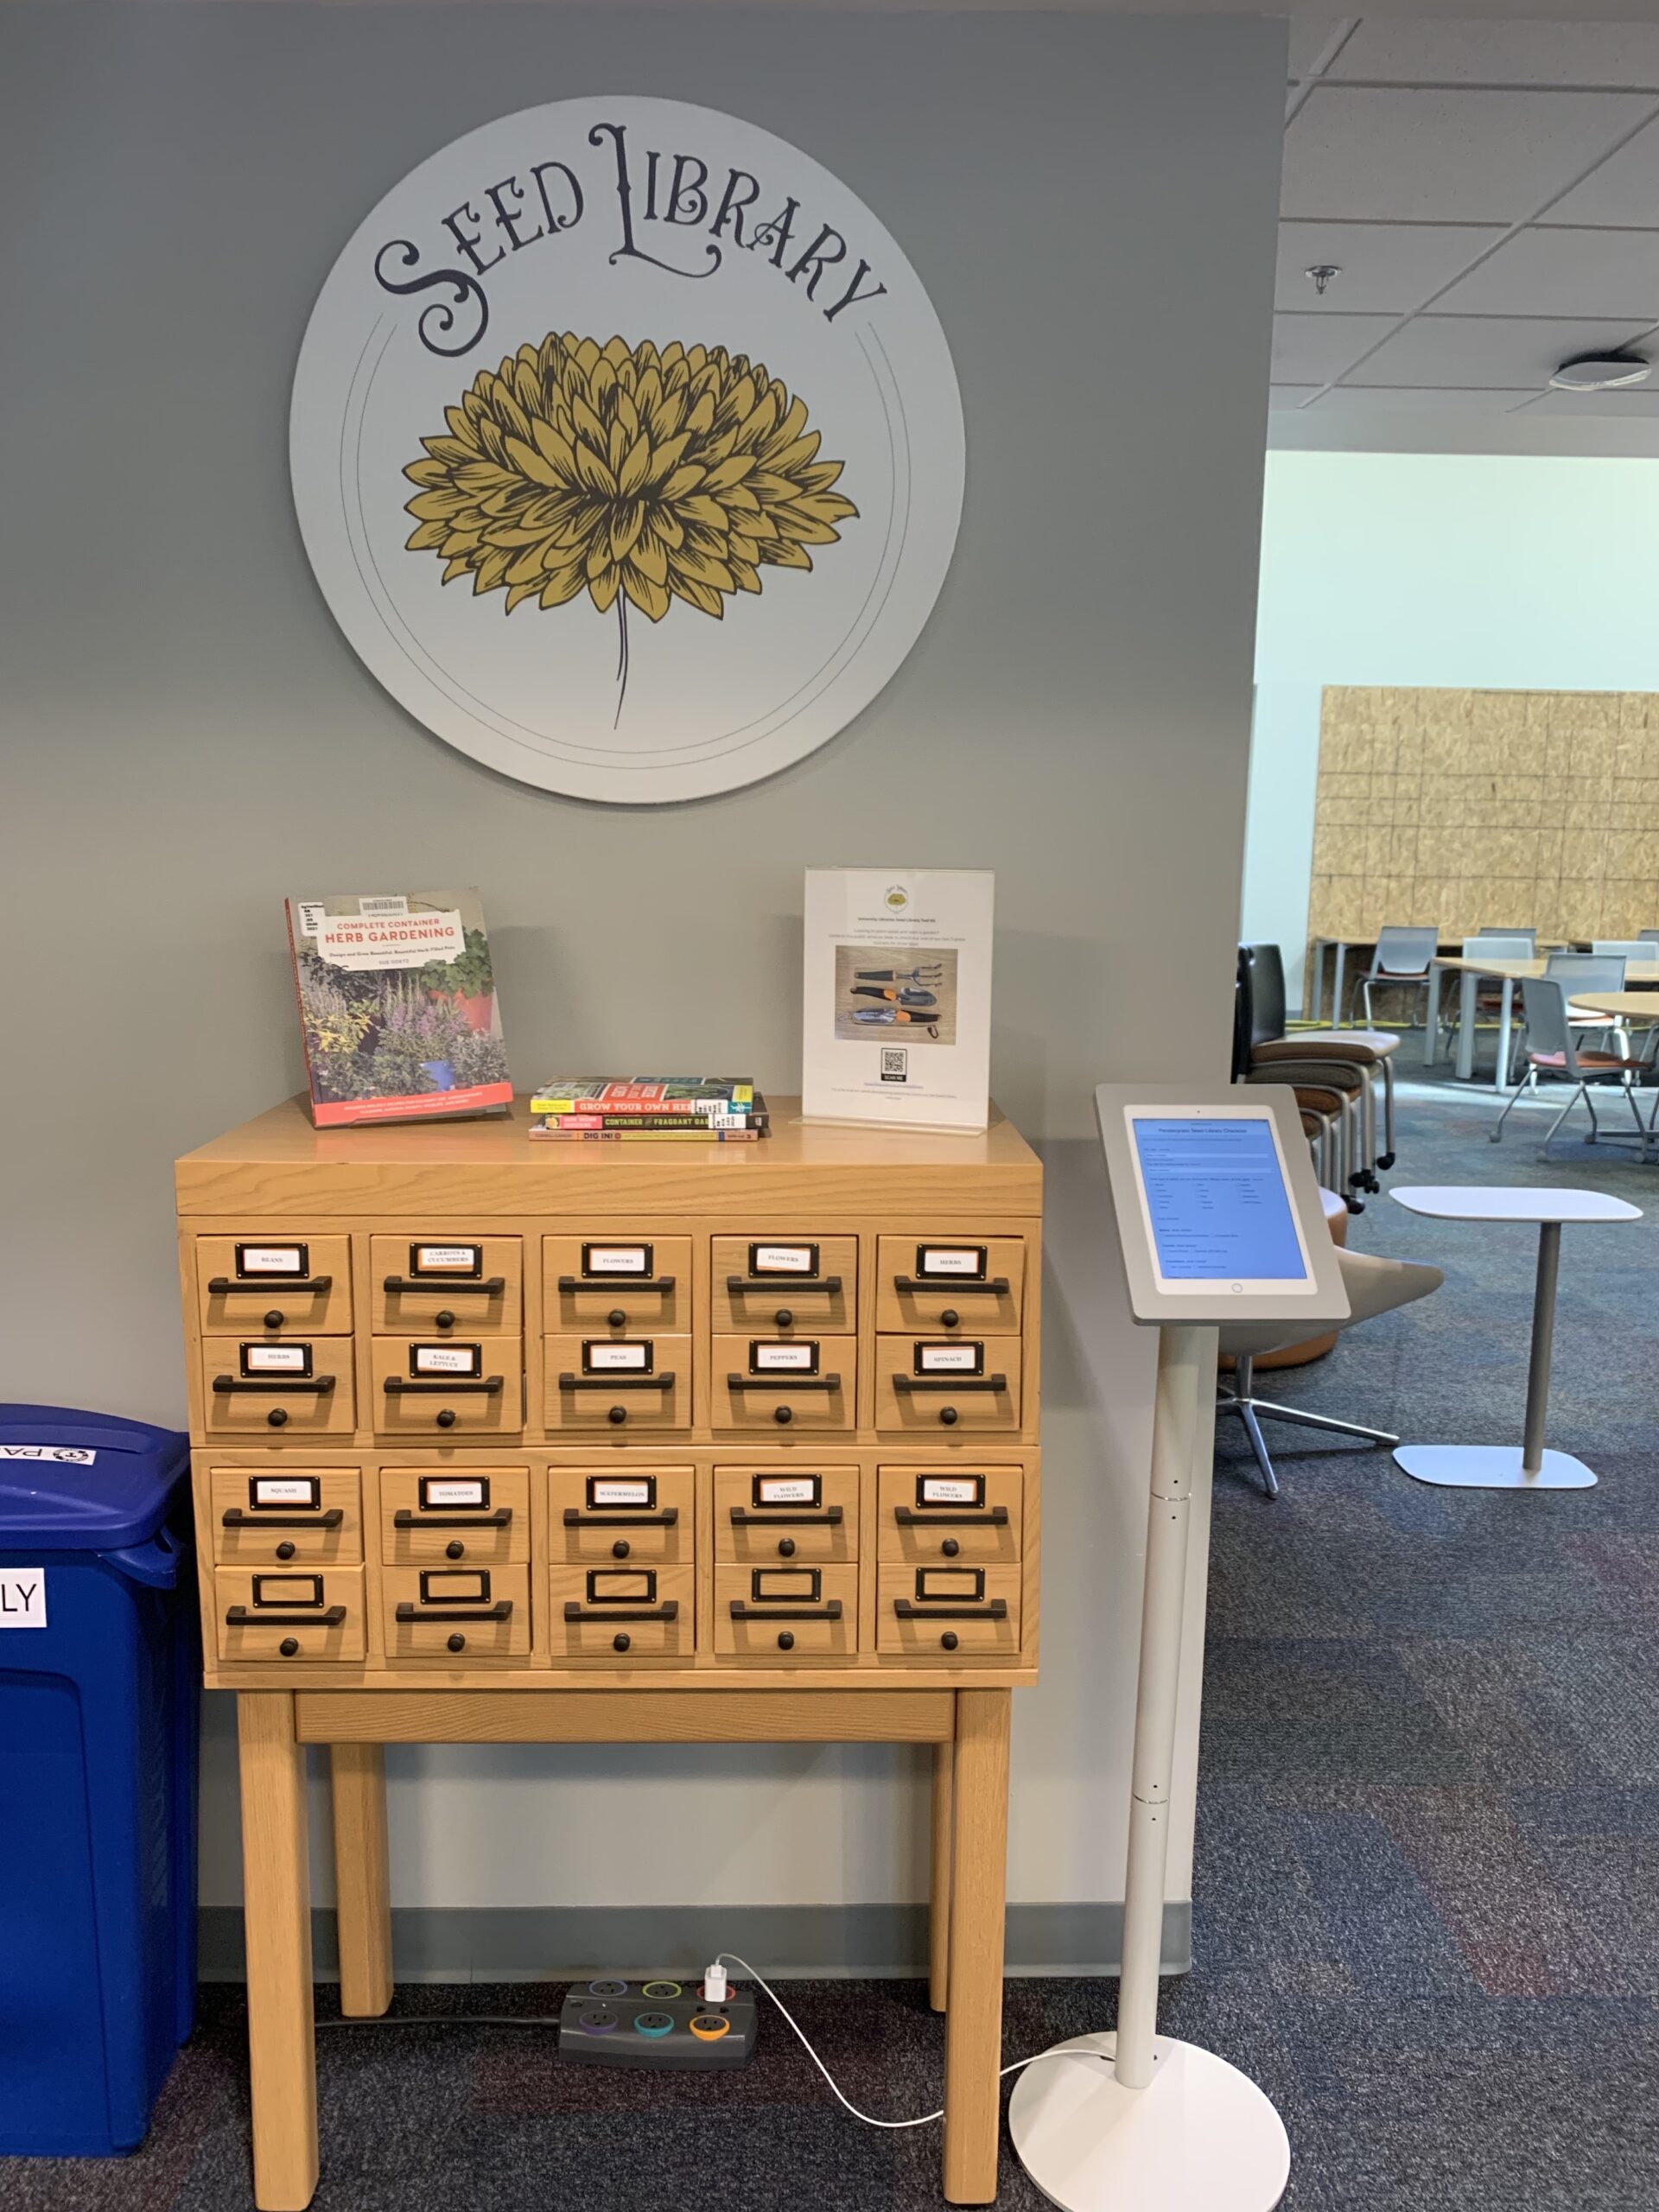 Seed Library card catalog and sign